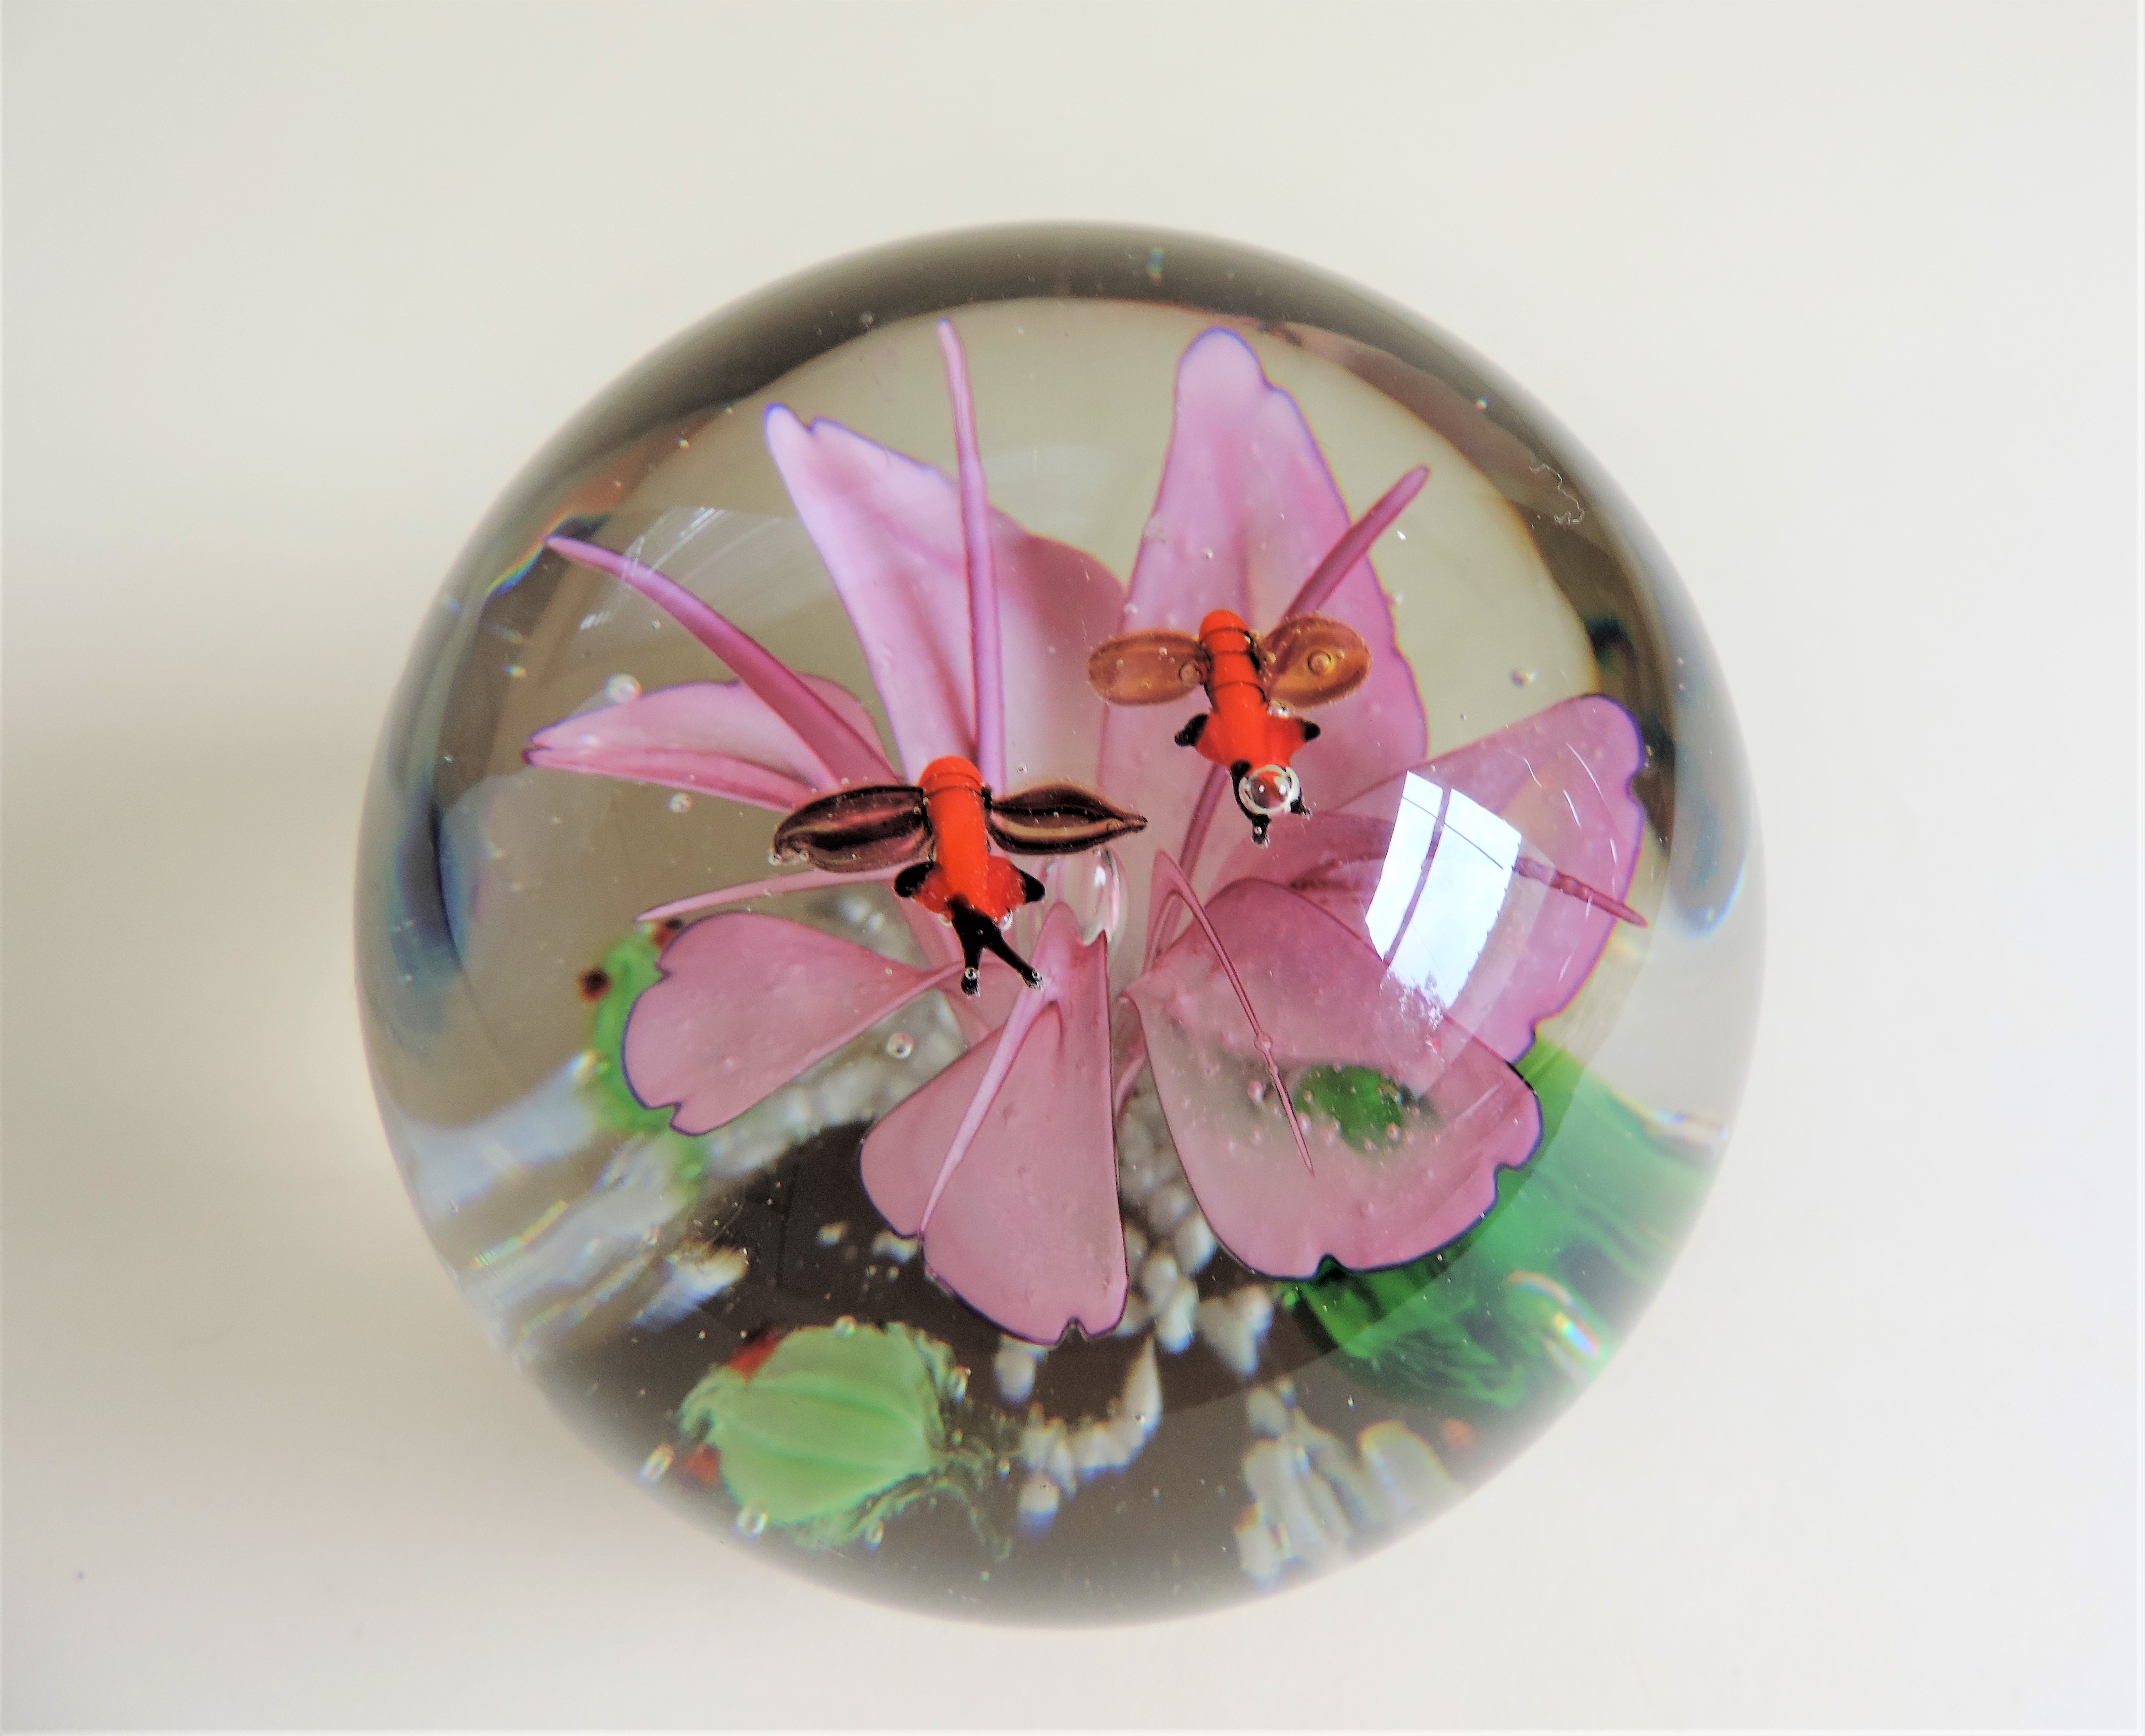 Vintage Art Glass Paperweight Pink Flower and Flying Bees - Image 2 of 4